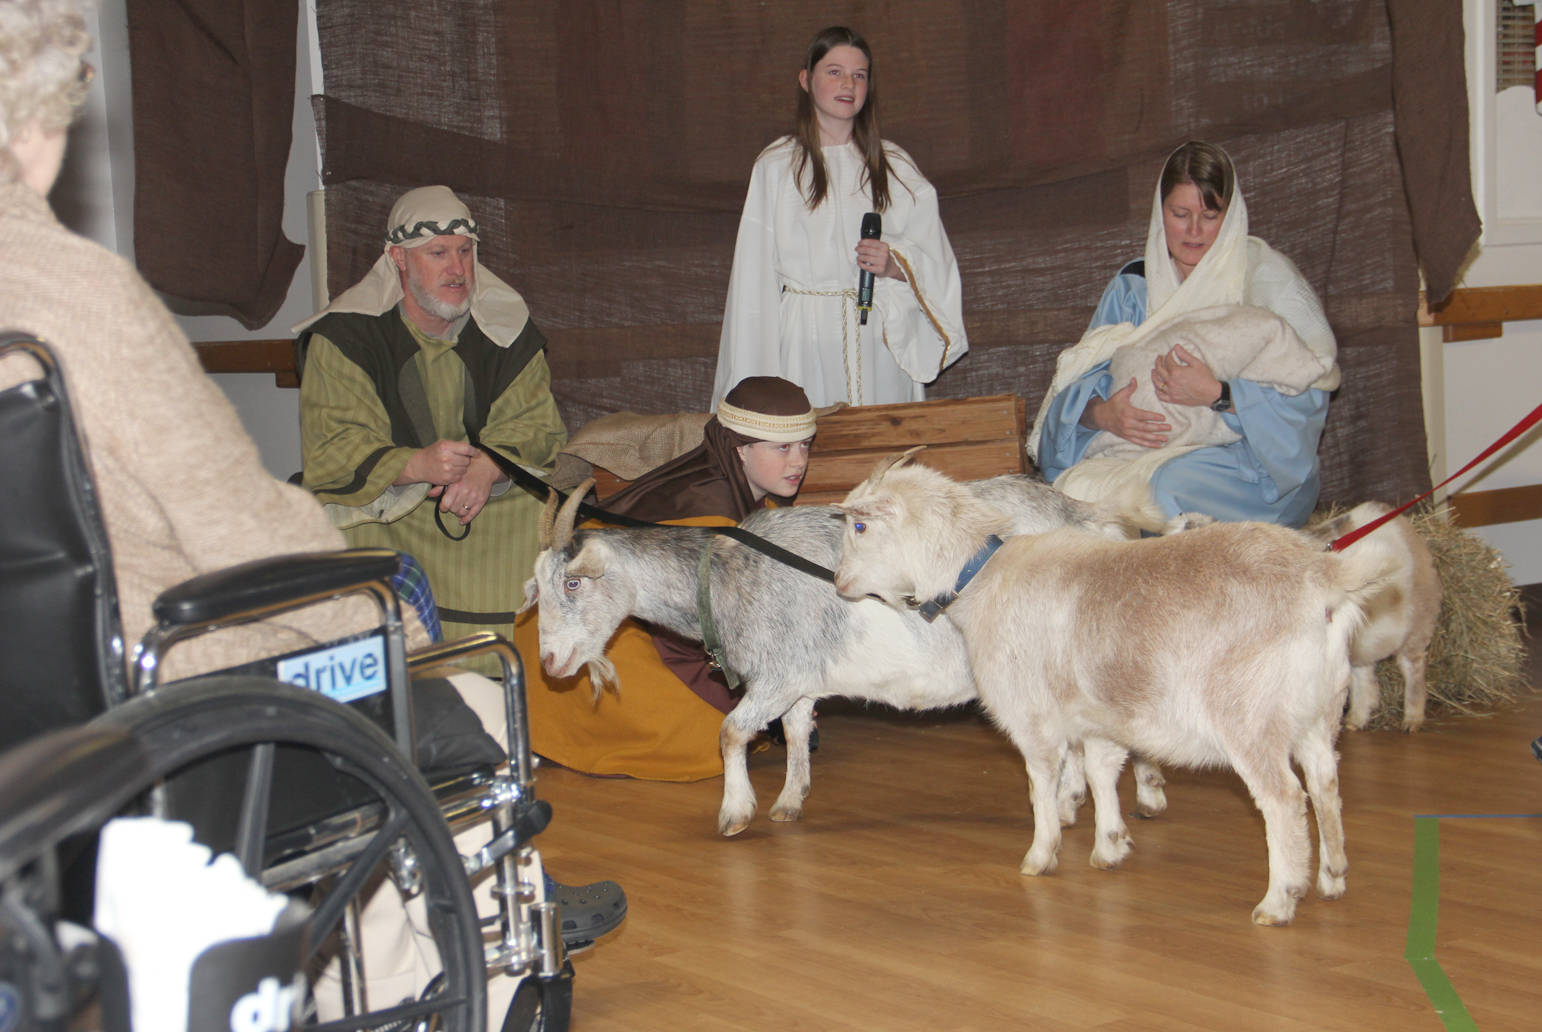 Even the goats came to visit as Bethlehem Revisited journeyed to Heritage Place.